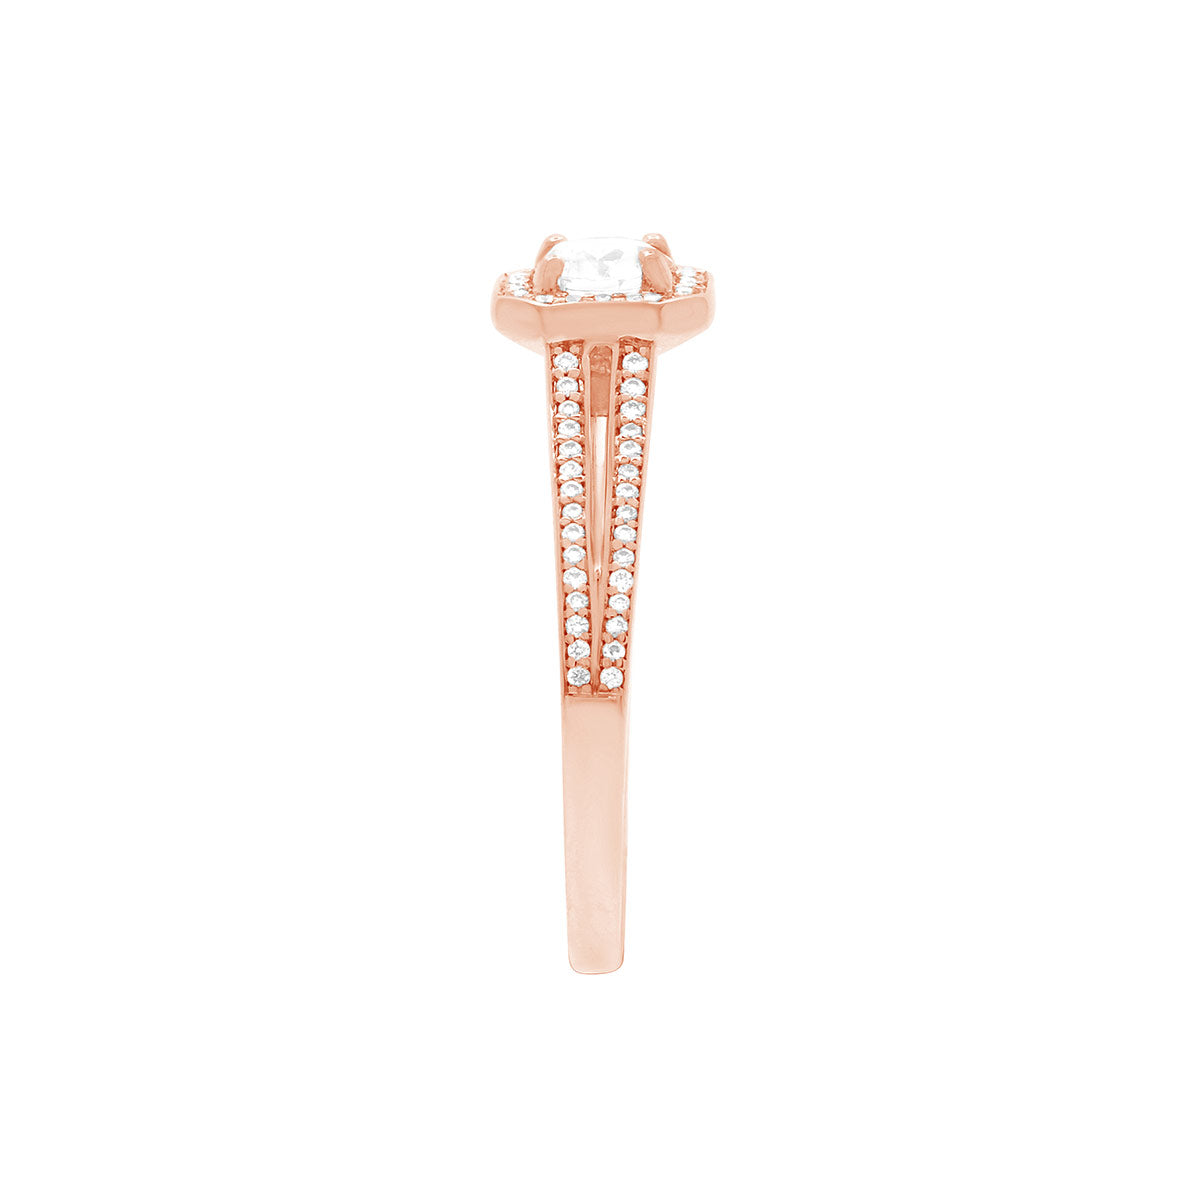 Pavé Halo Diamond Ring with split shoulders in rose gold in a side view position